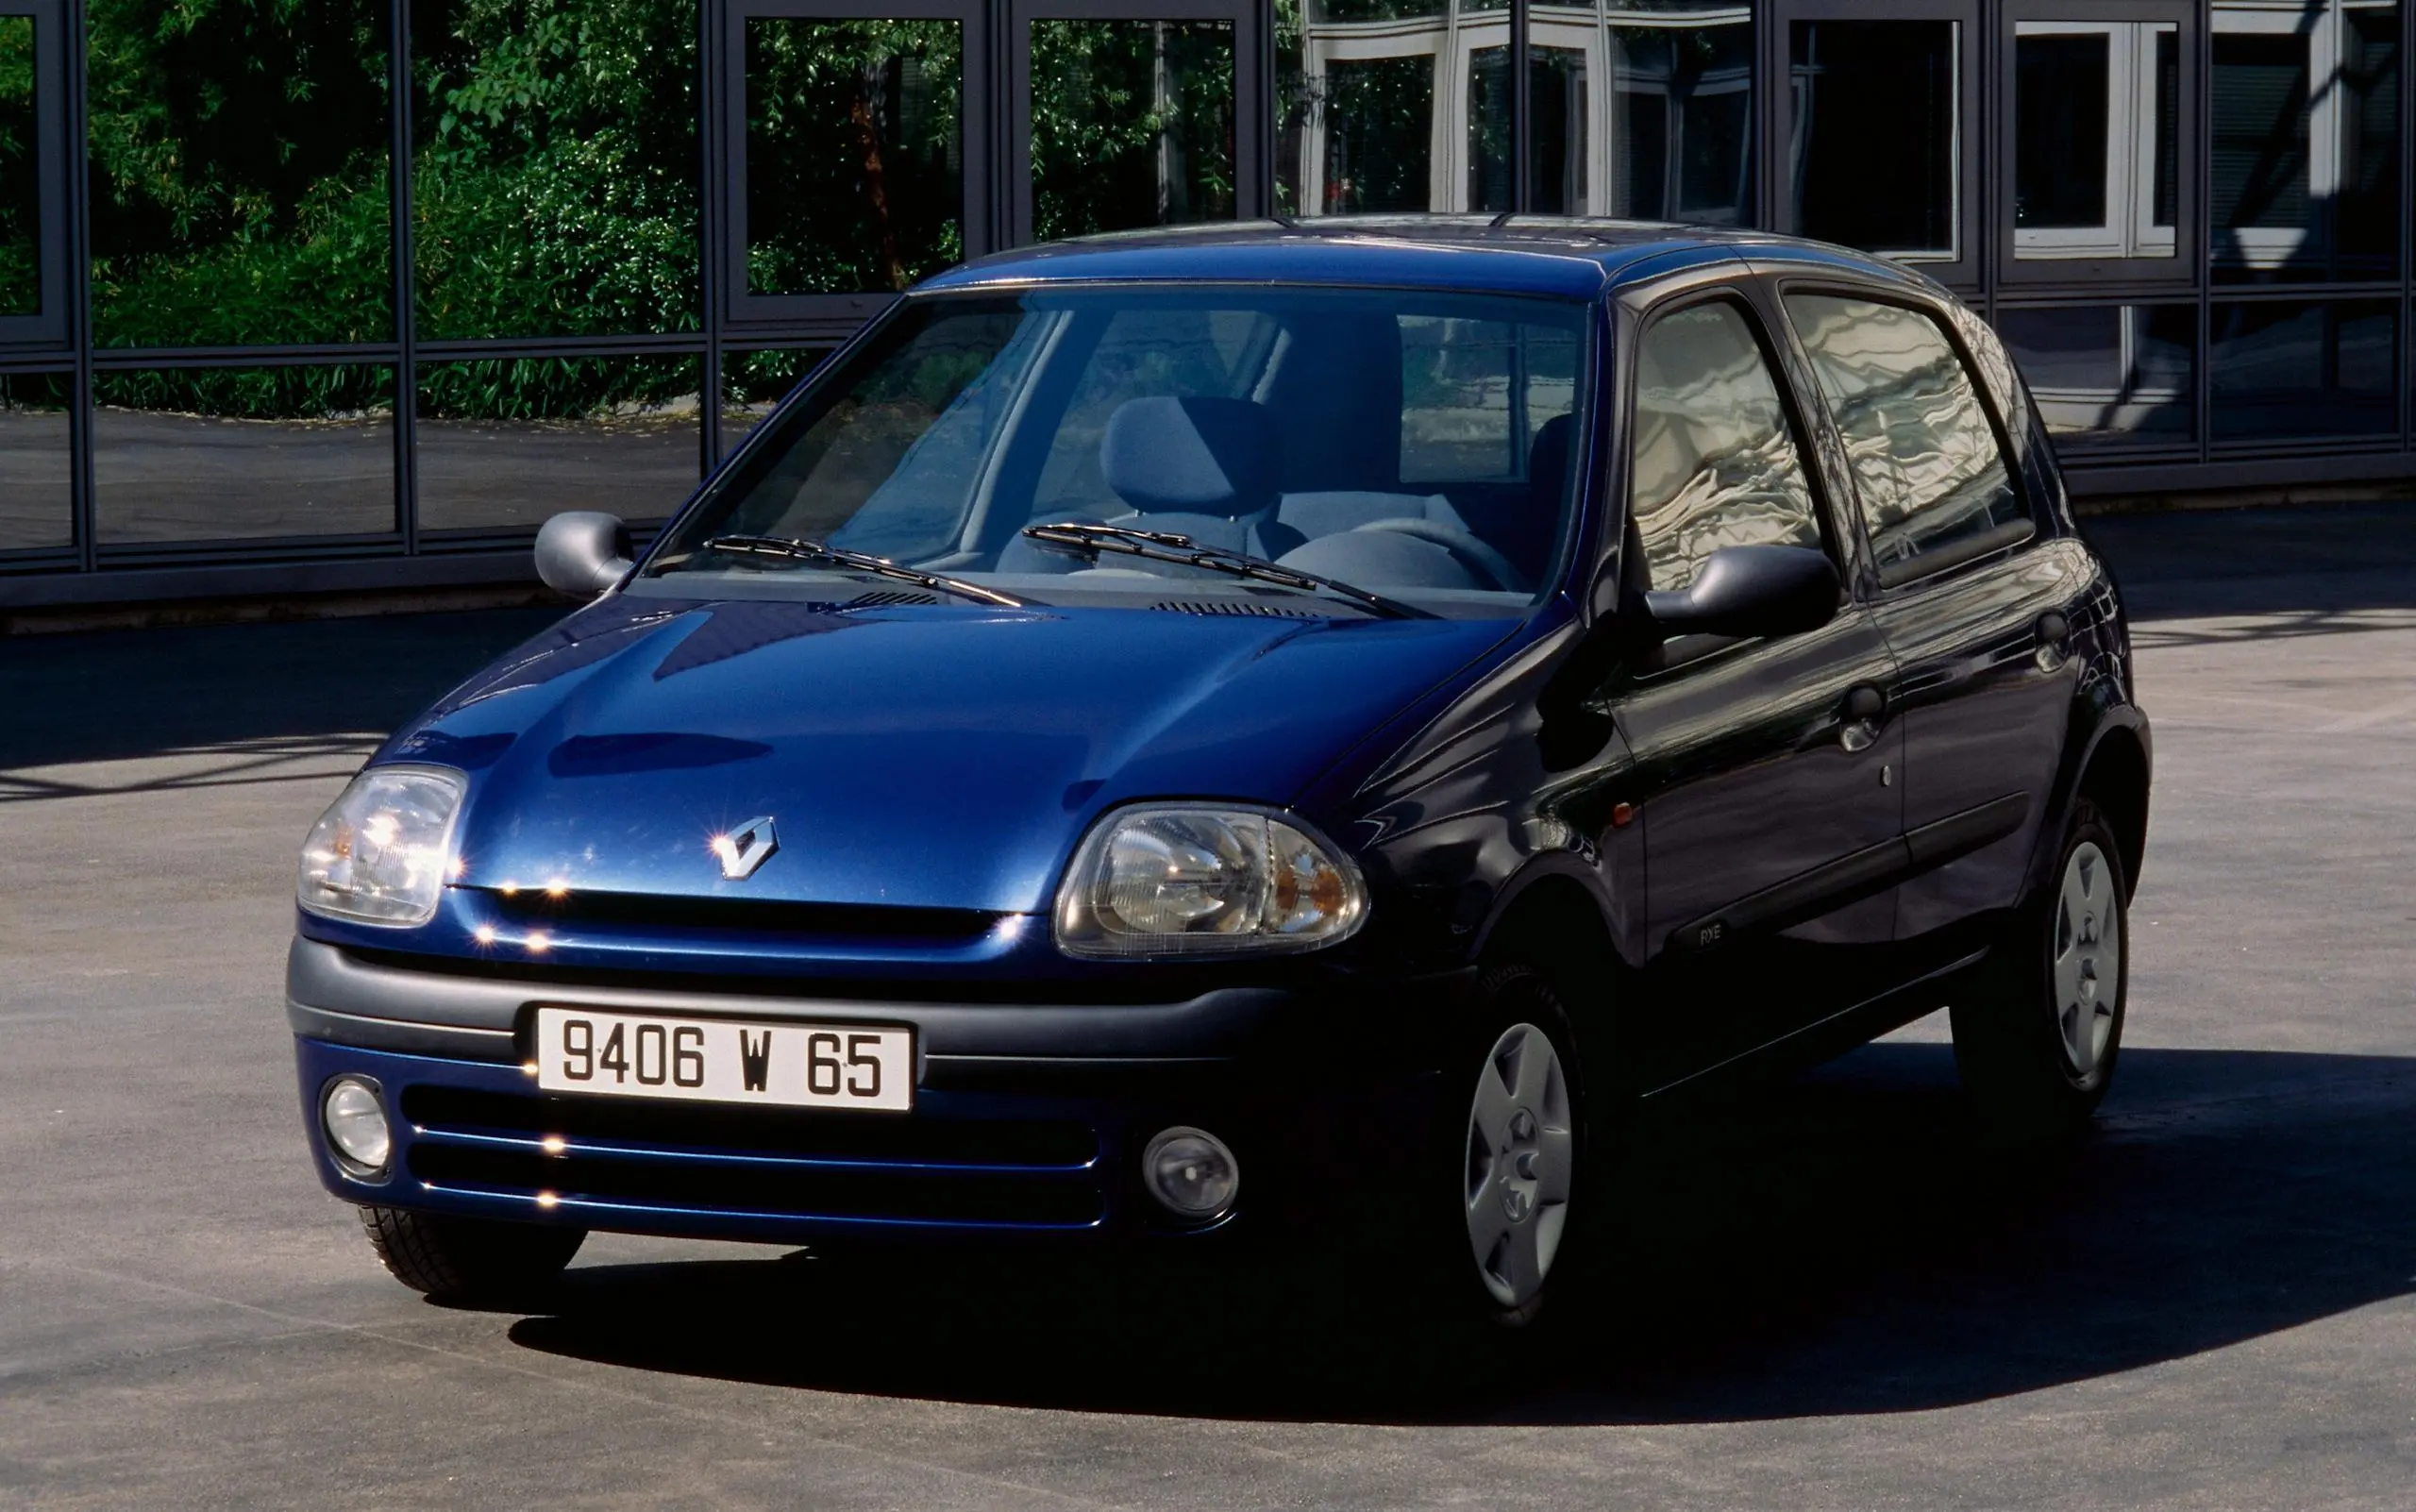 File:Renault Clio II front 20090329.jpg - Wikimedia Commons